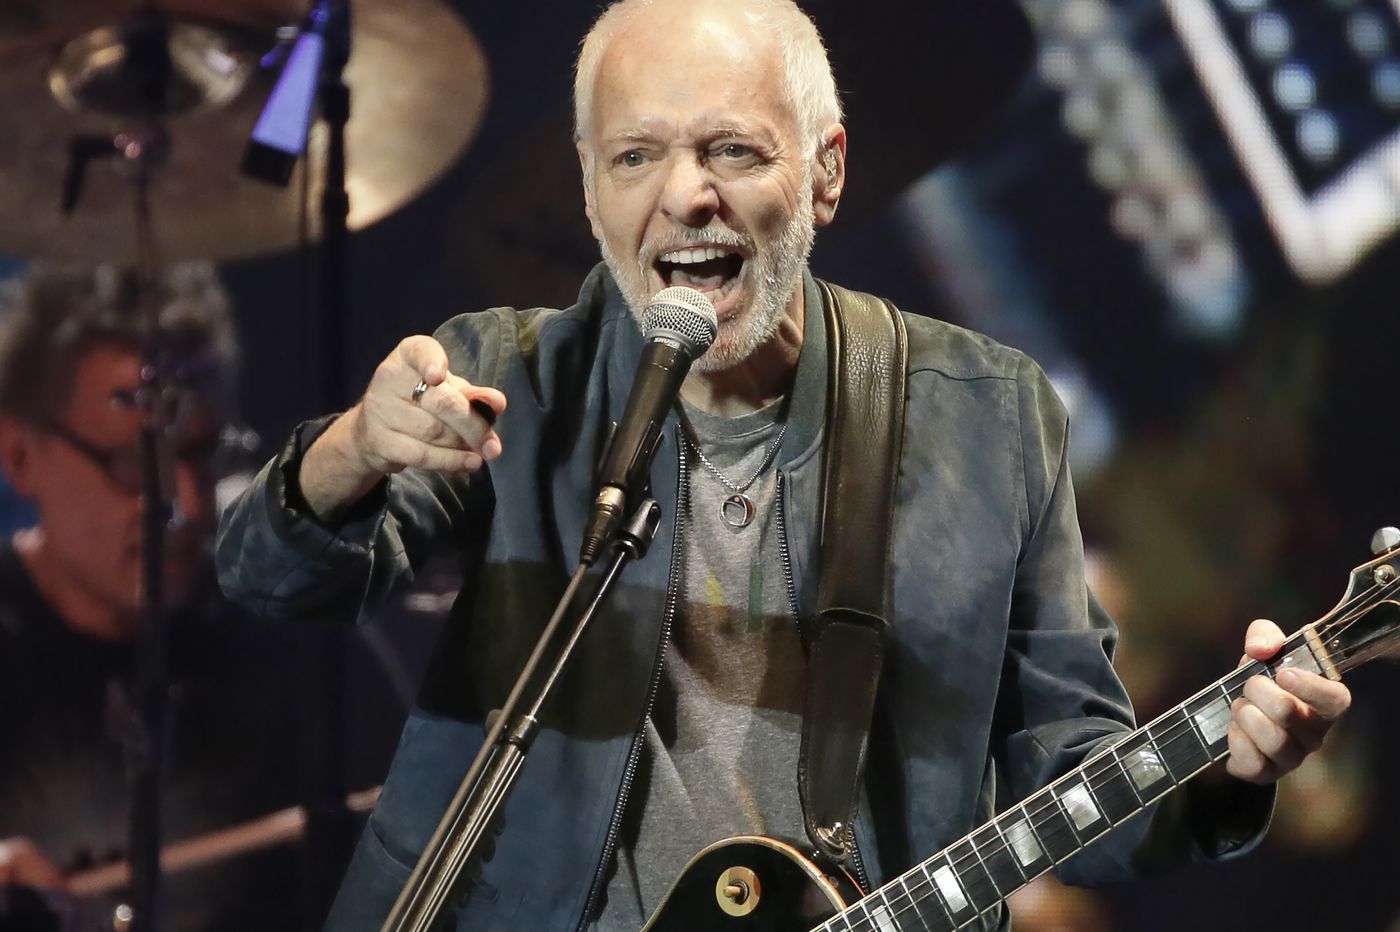 Peter Frampton plays his last Philly show at the Met before retirement